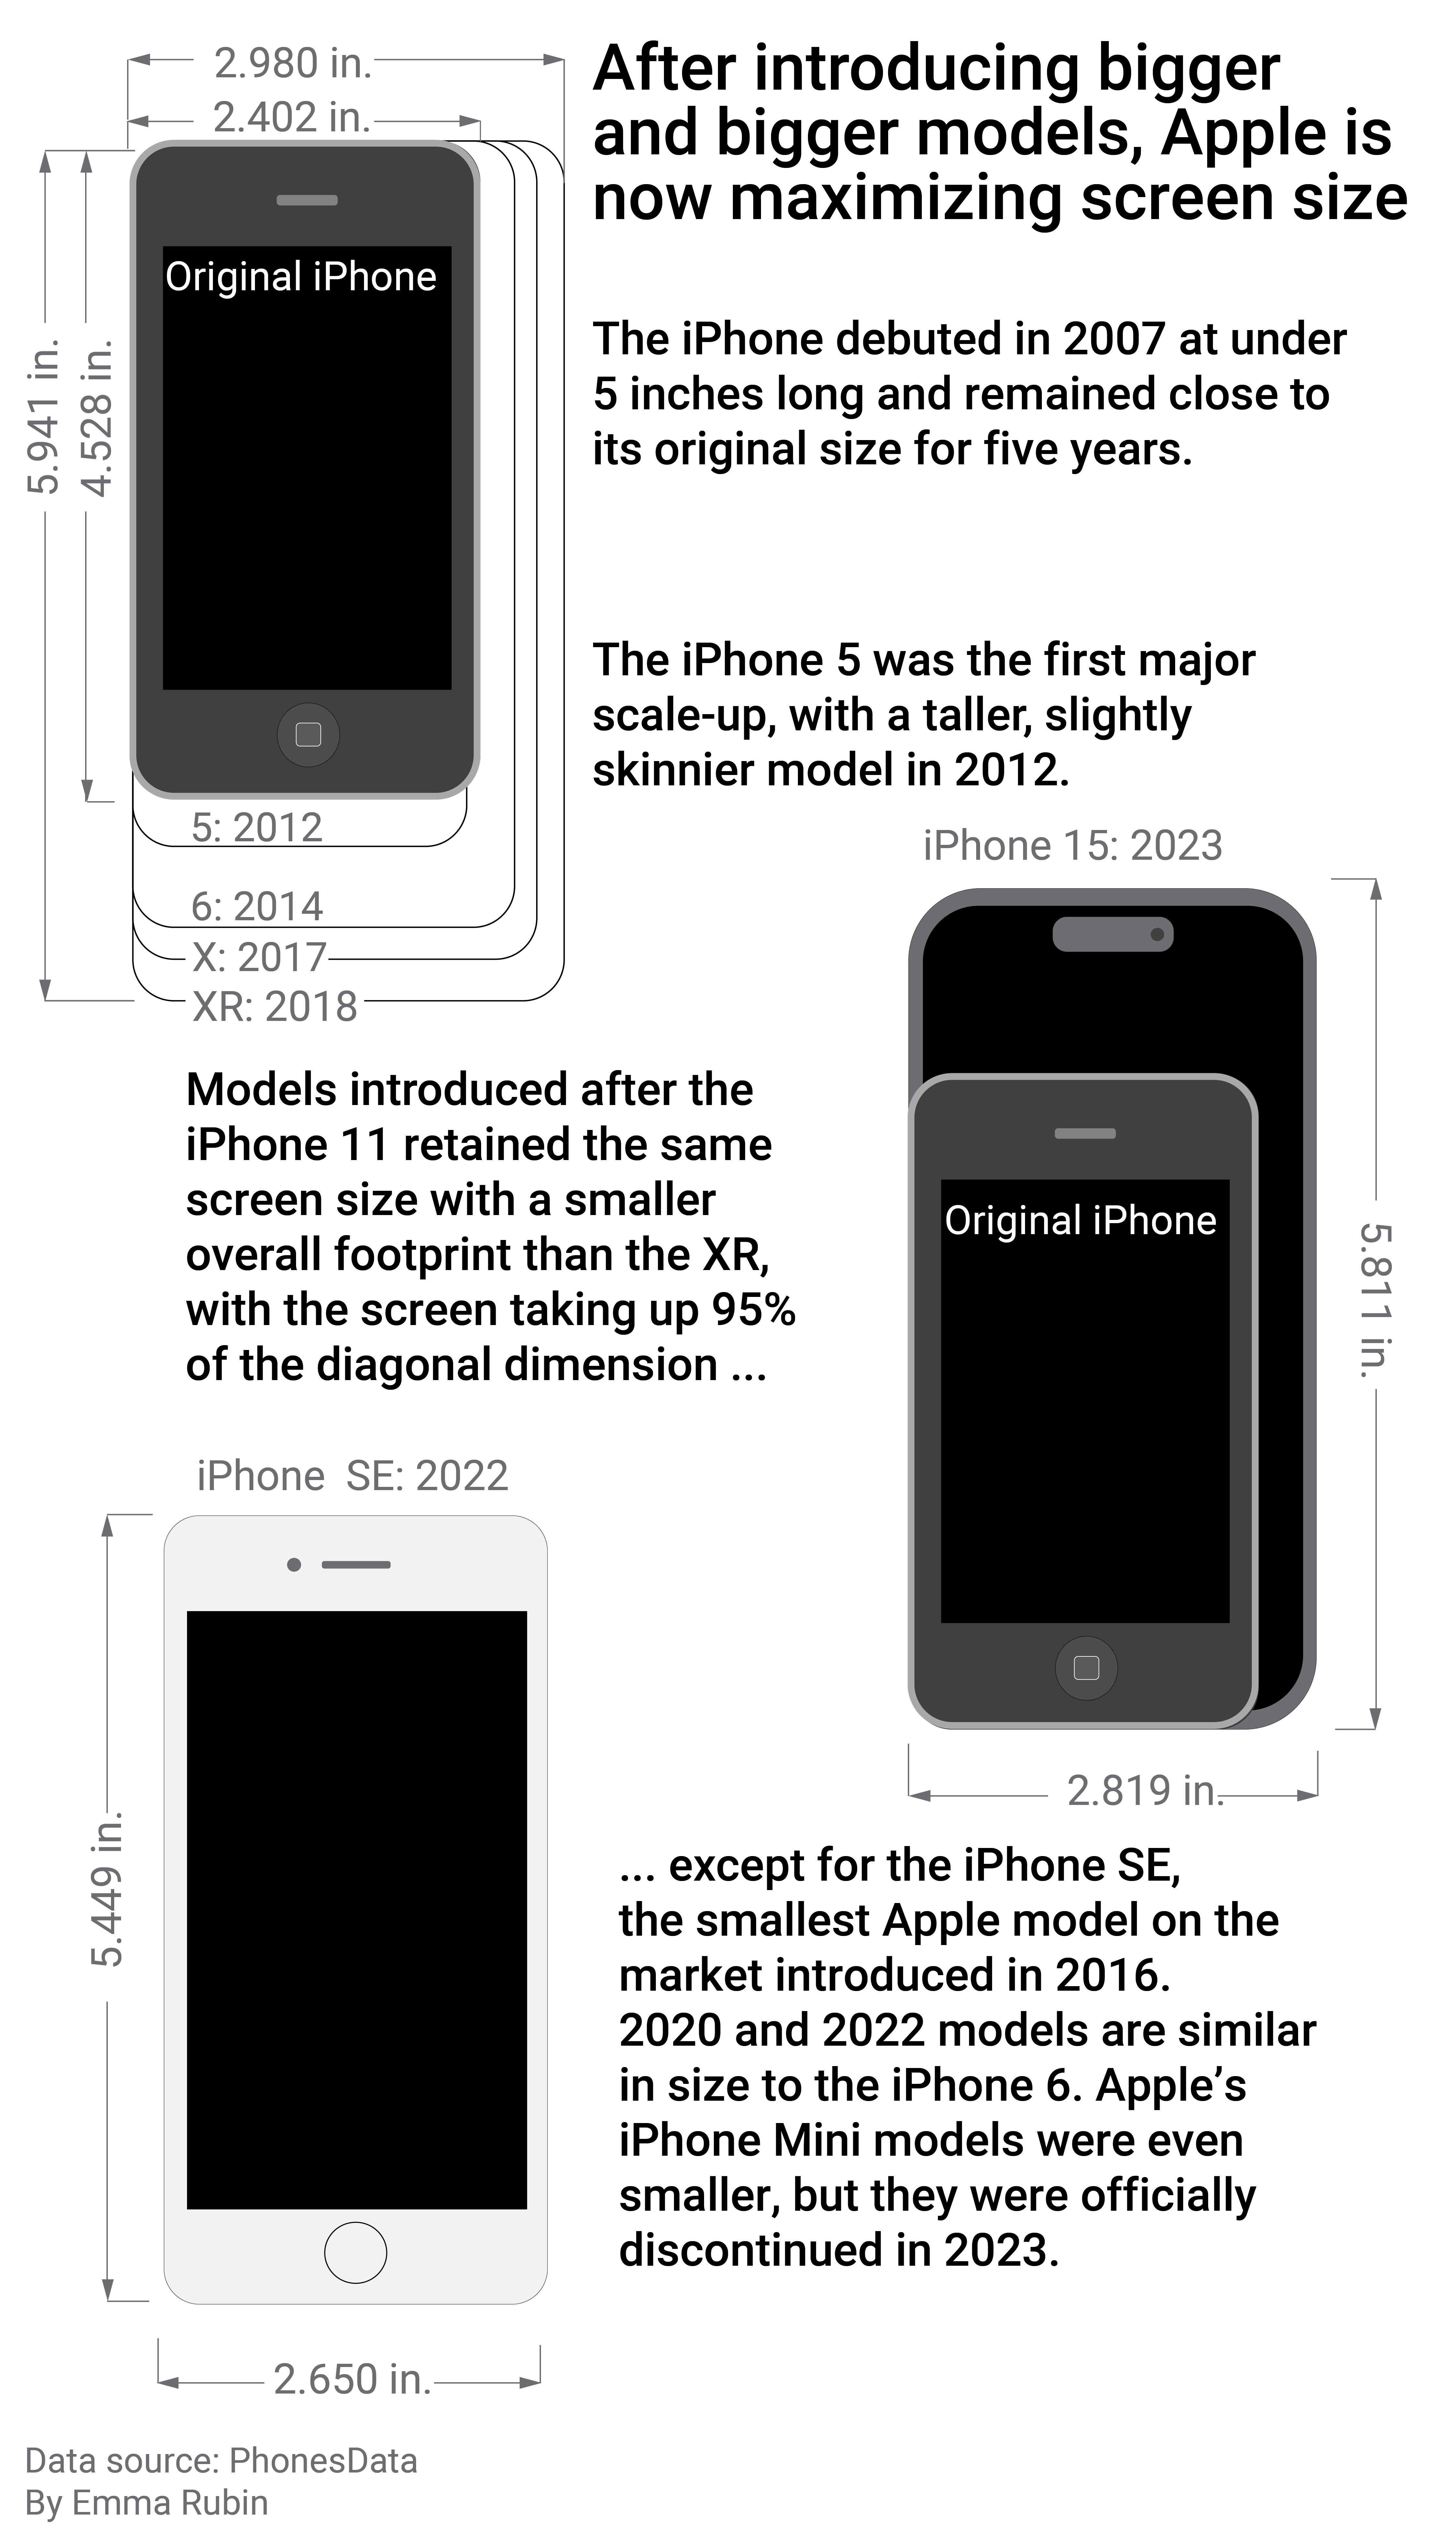 Graphic showing how Apple has maximized screen size since the iPhone debuted in 2007.